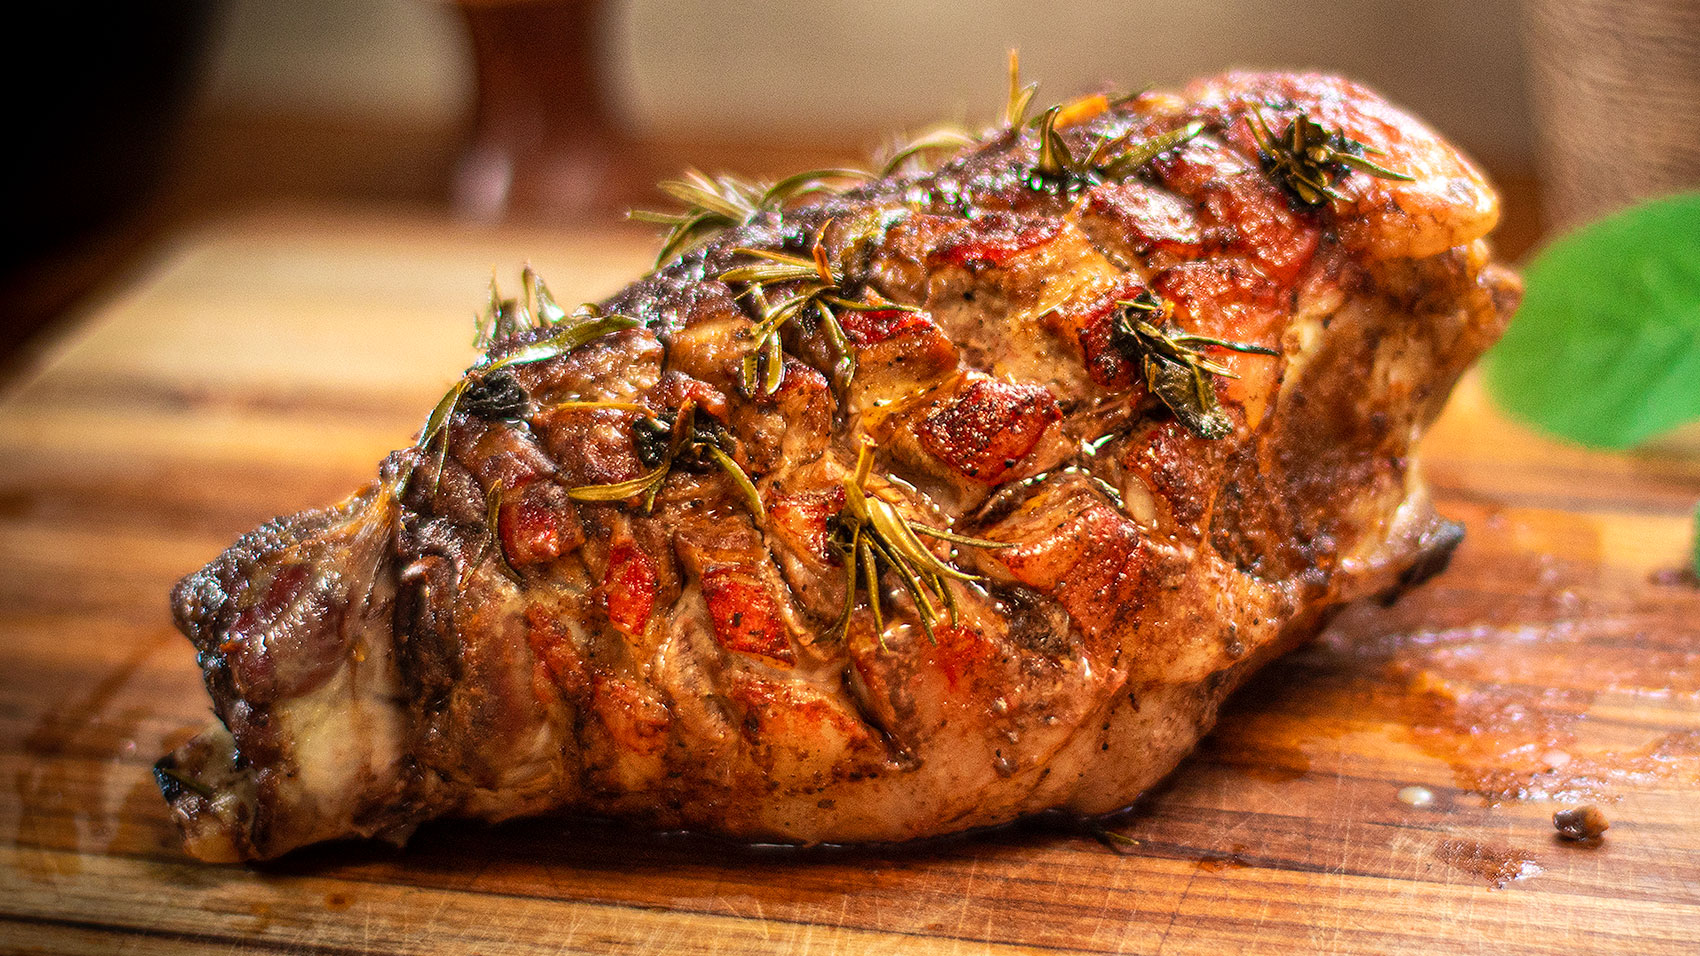 Roast Leg of Lamb - Easy Meals with Video Recipes by Chef Joel Mielle